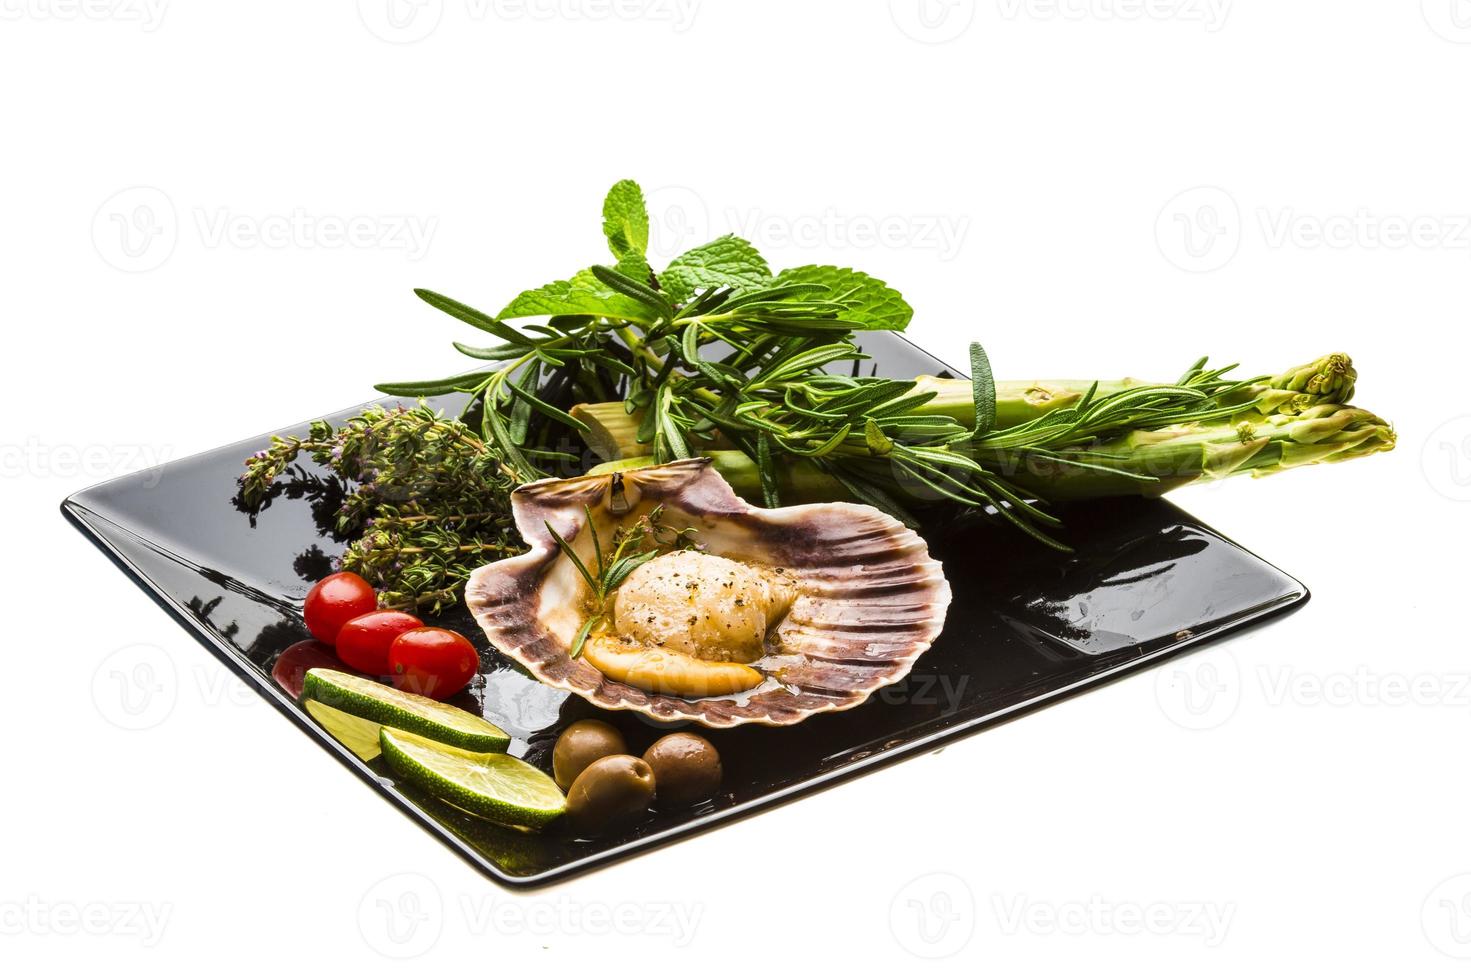 Scallop with asparagus, lime, mint and rosemary photo